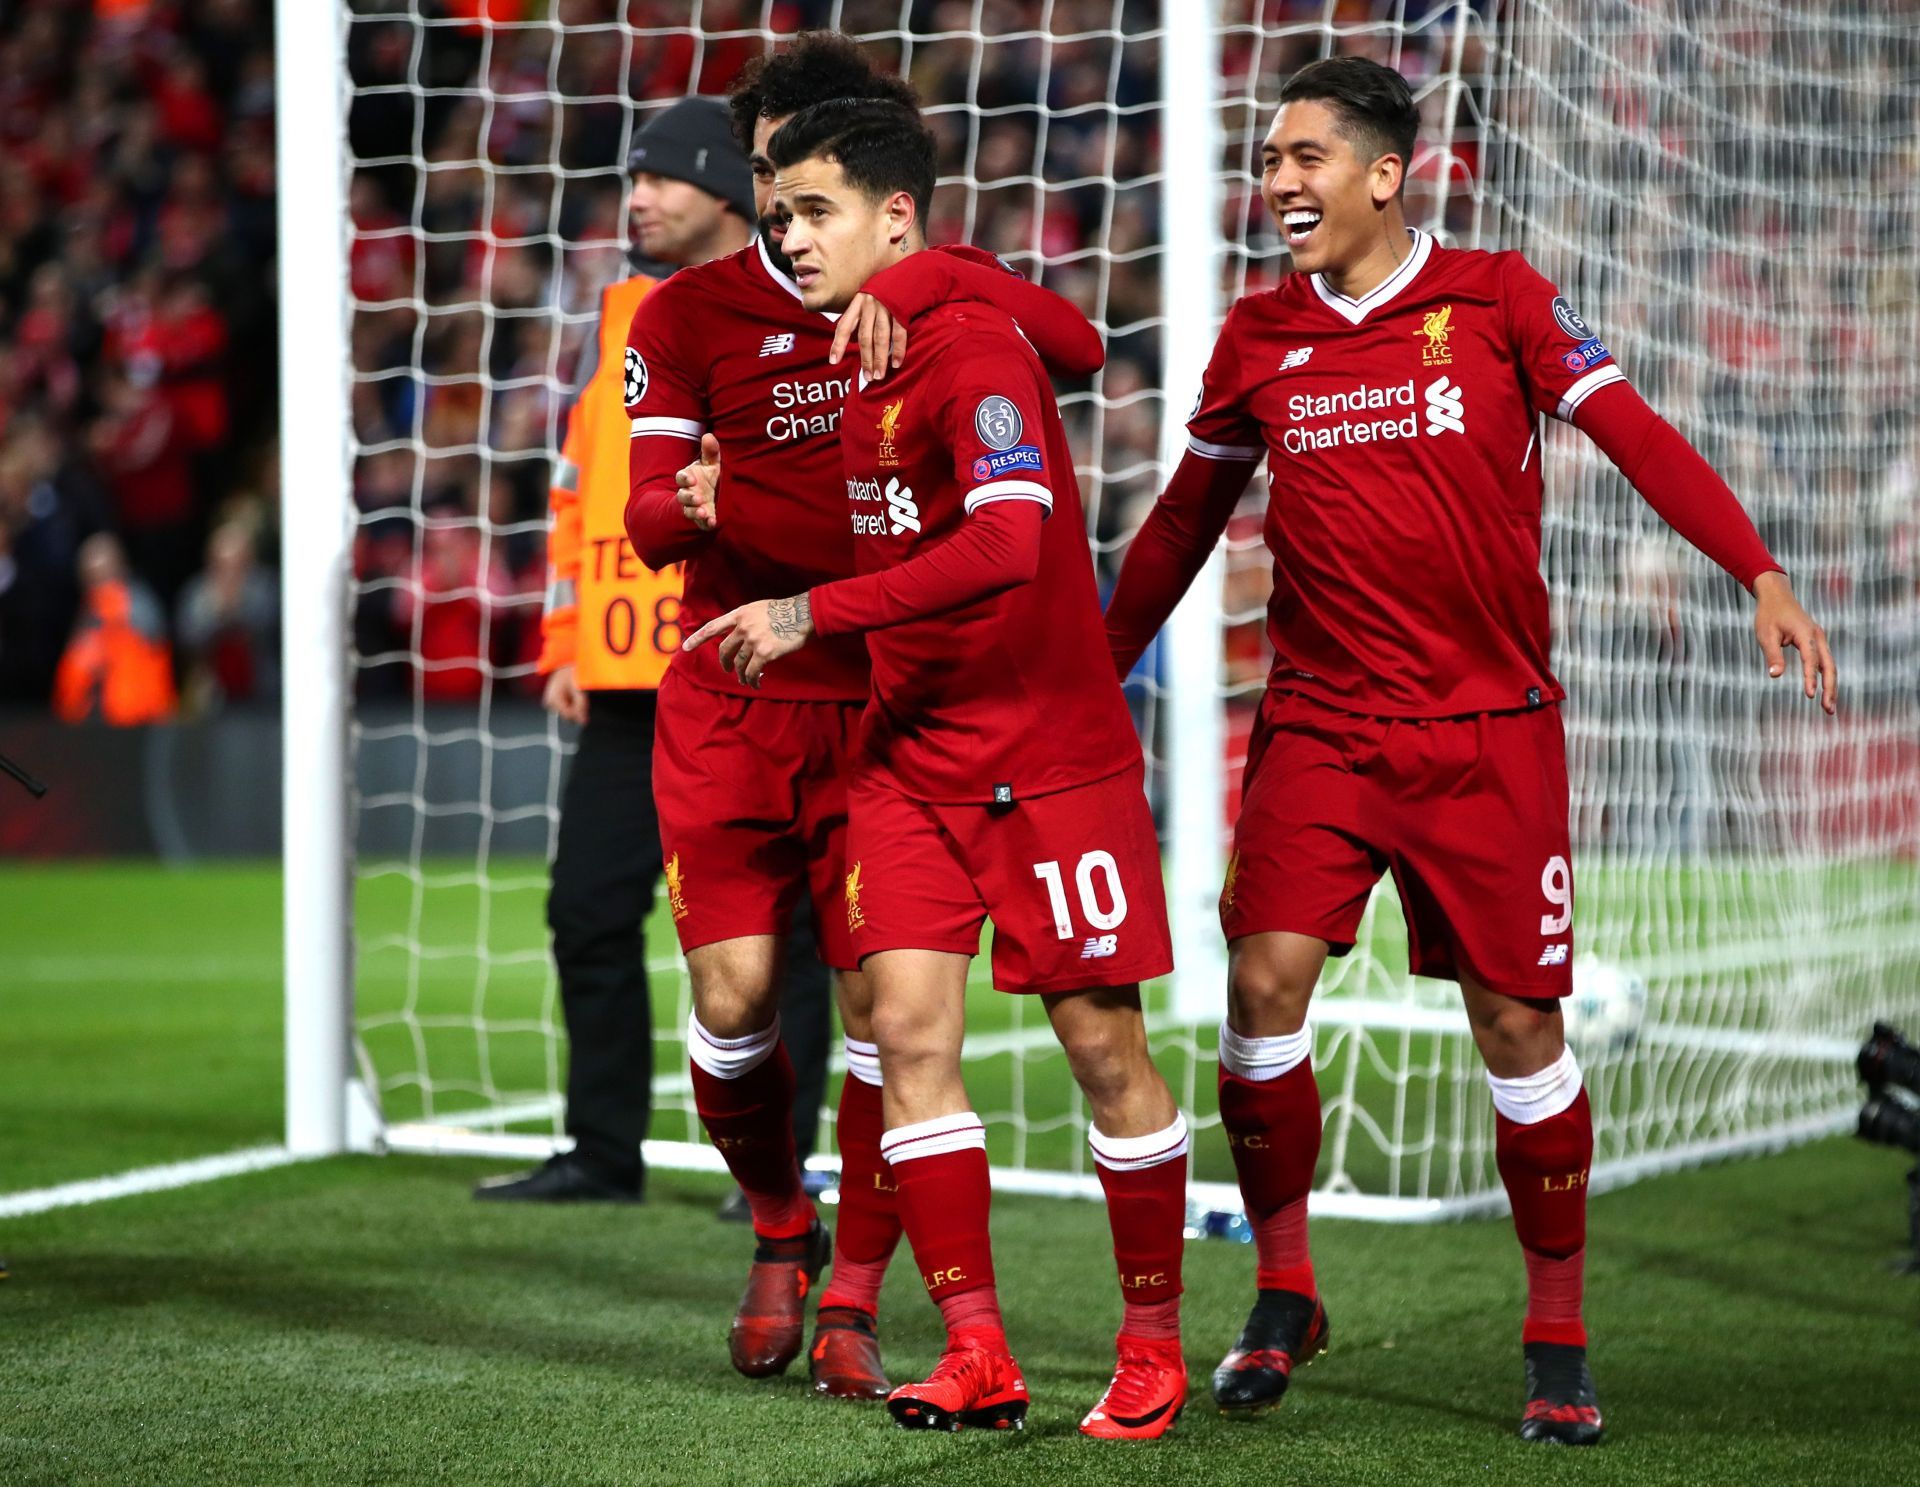 Coutinho shone brightly for Liverpool before joining Barcelona